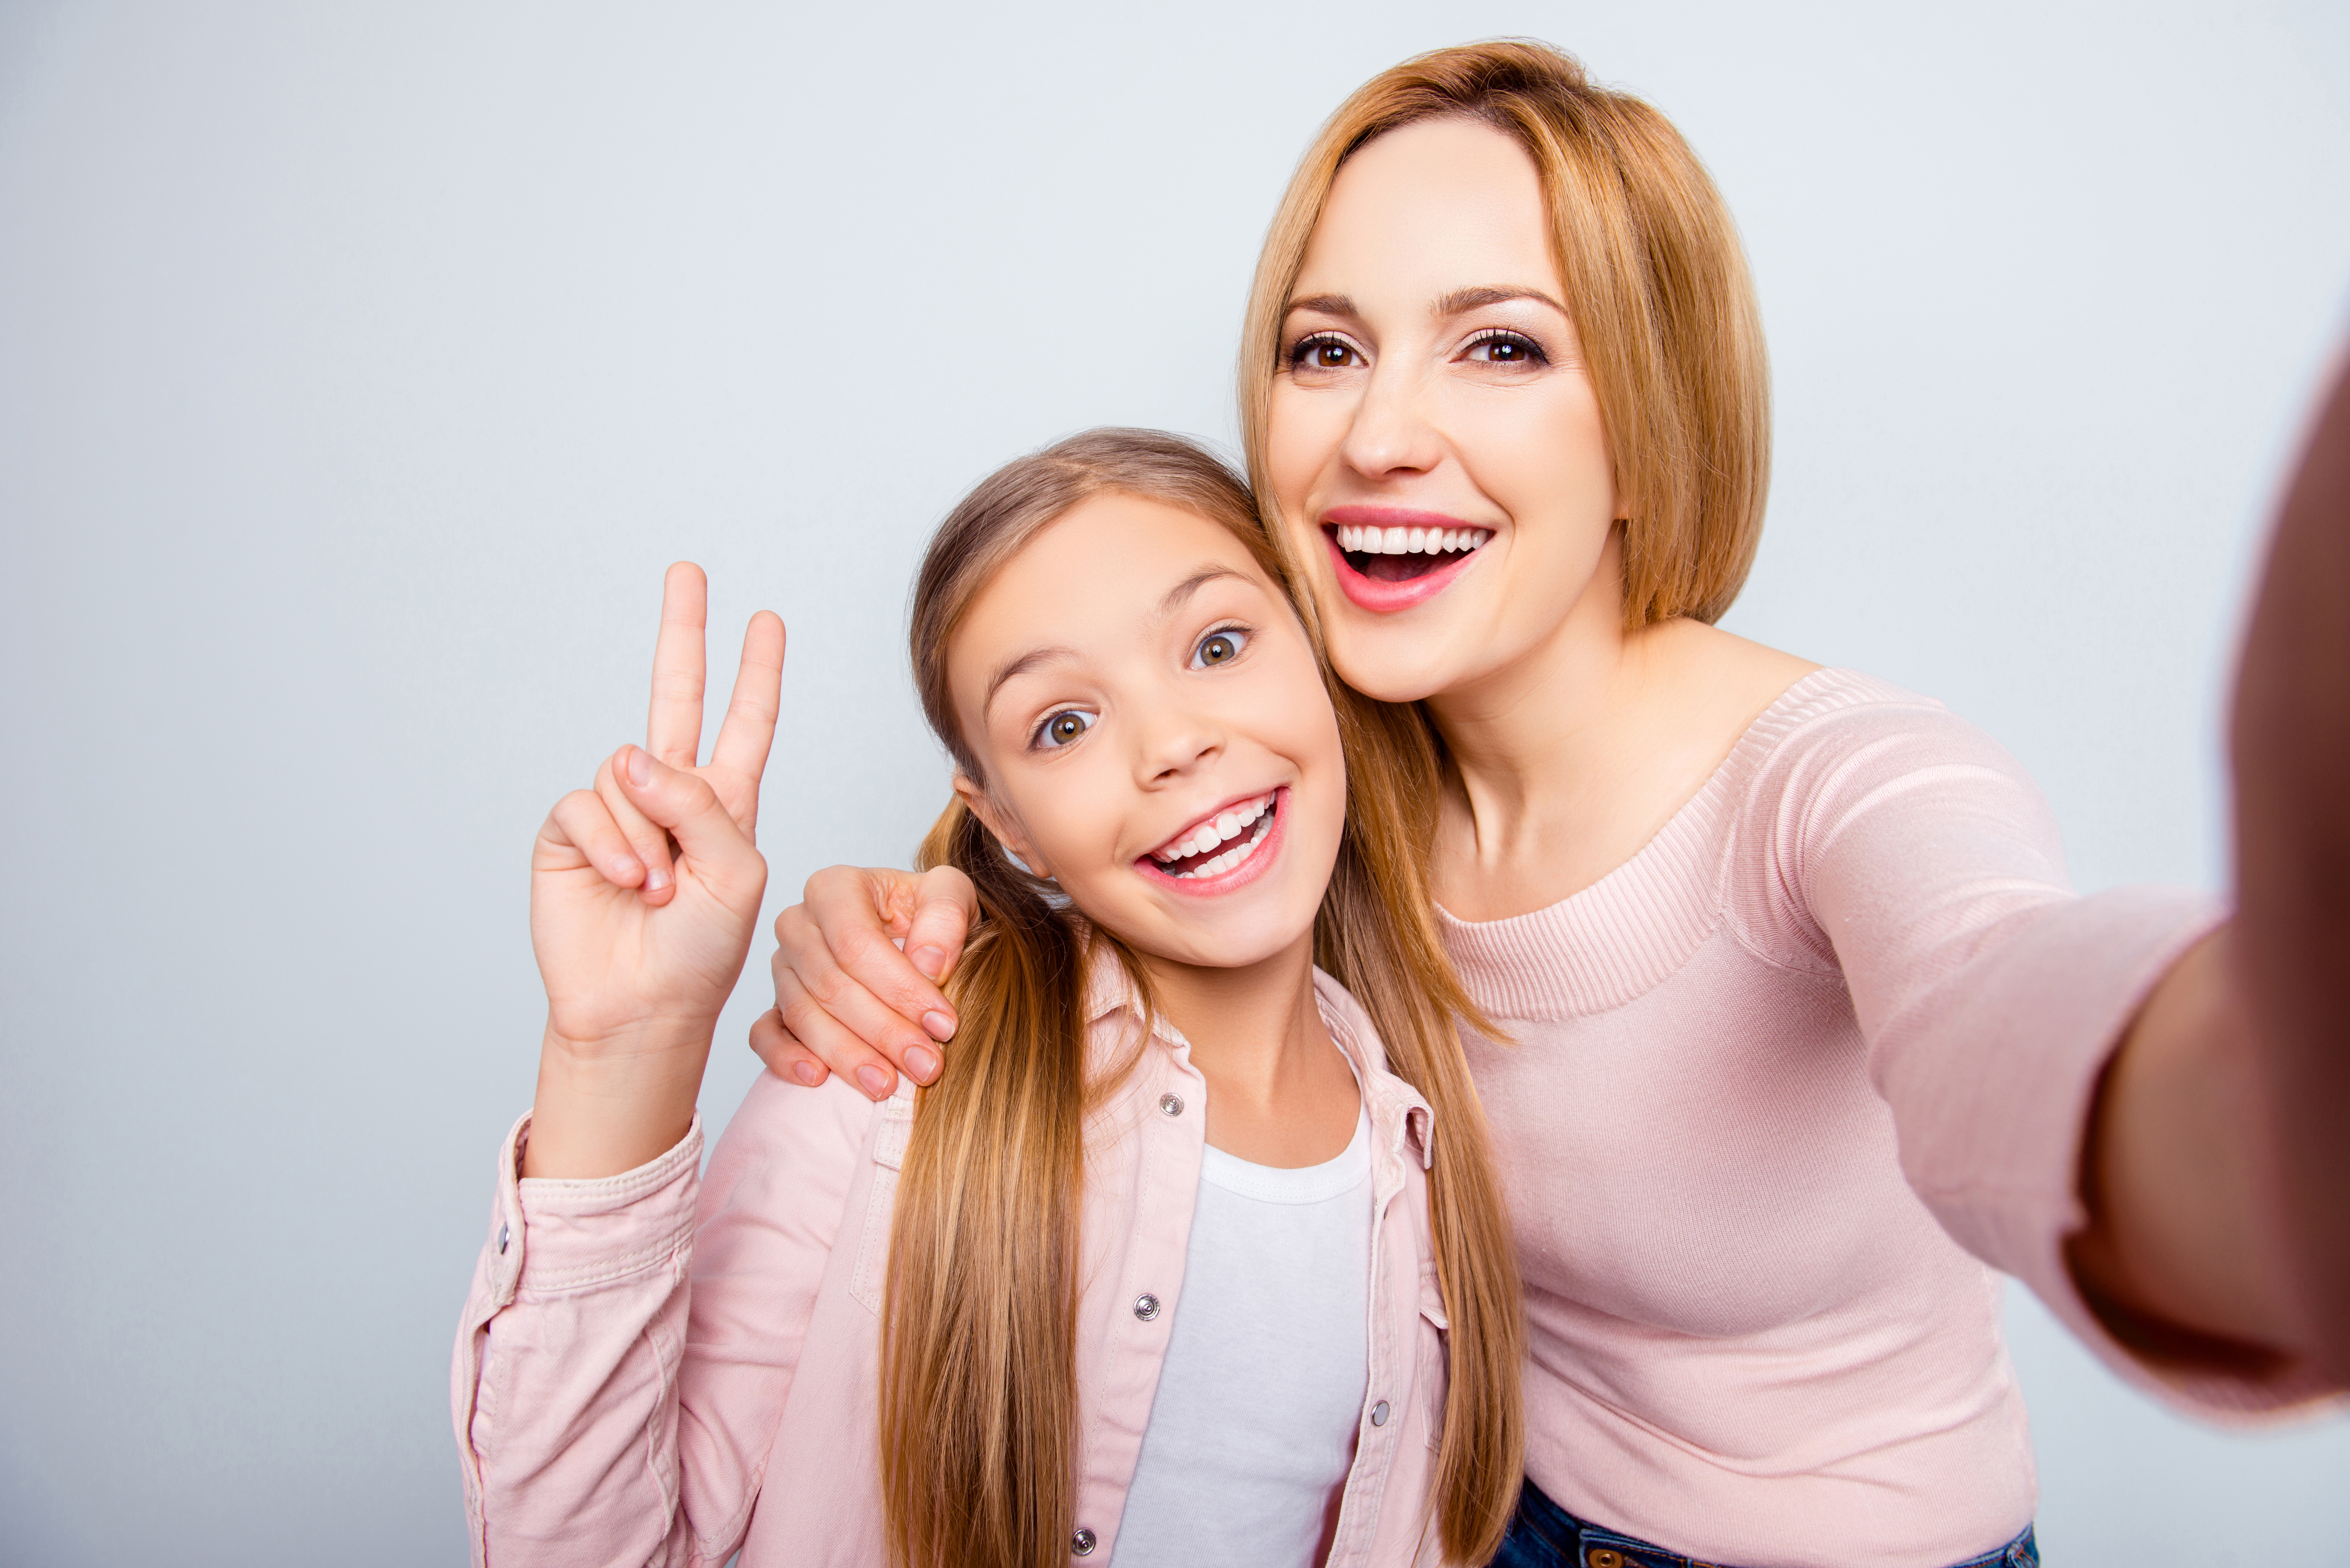 Happy girl and mom | Shutterstock